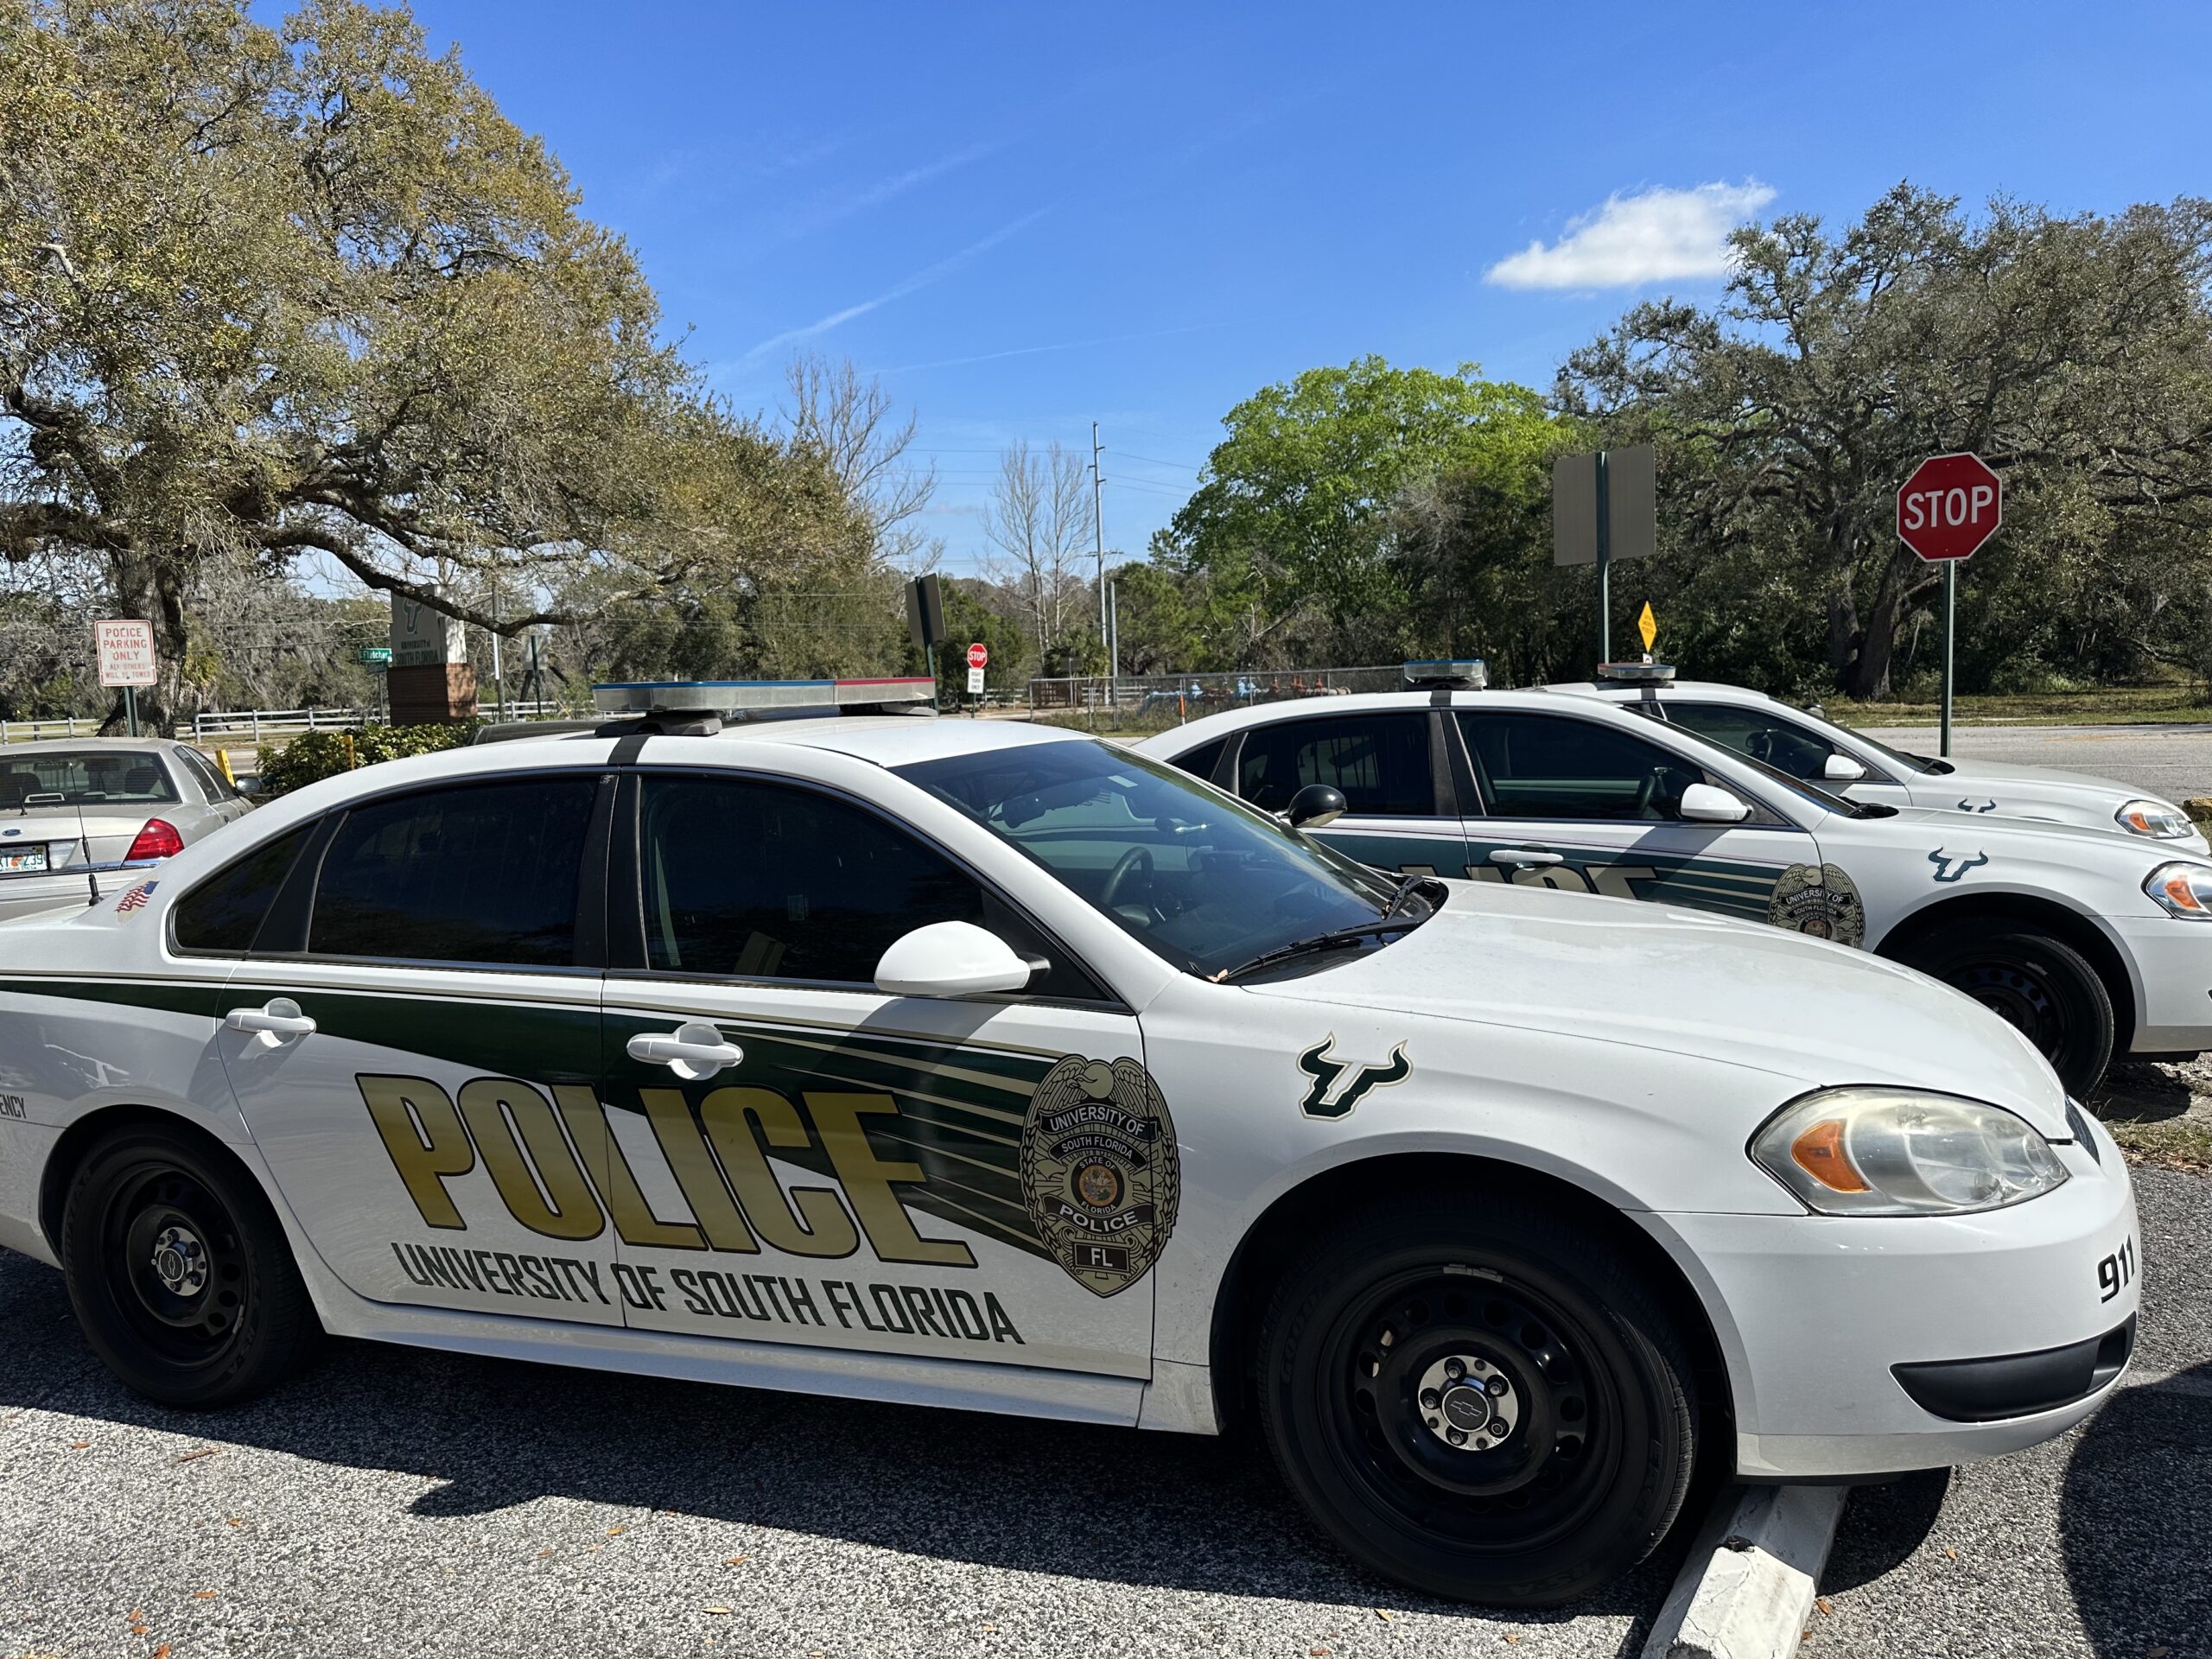 USFPD implements program to assist officers in welfare checks – The Oracle